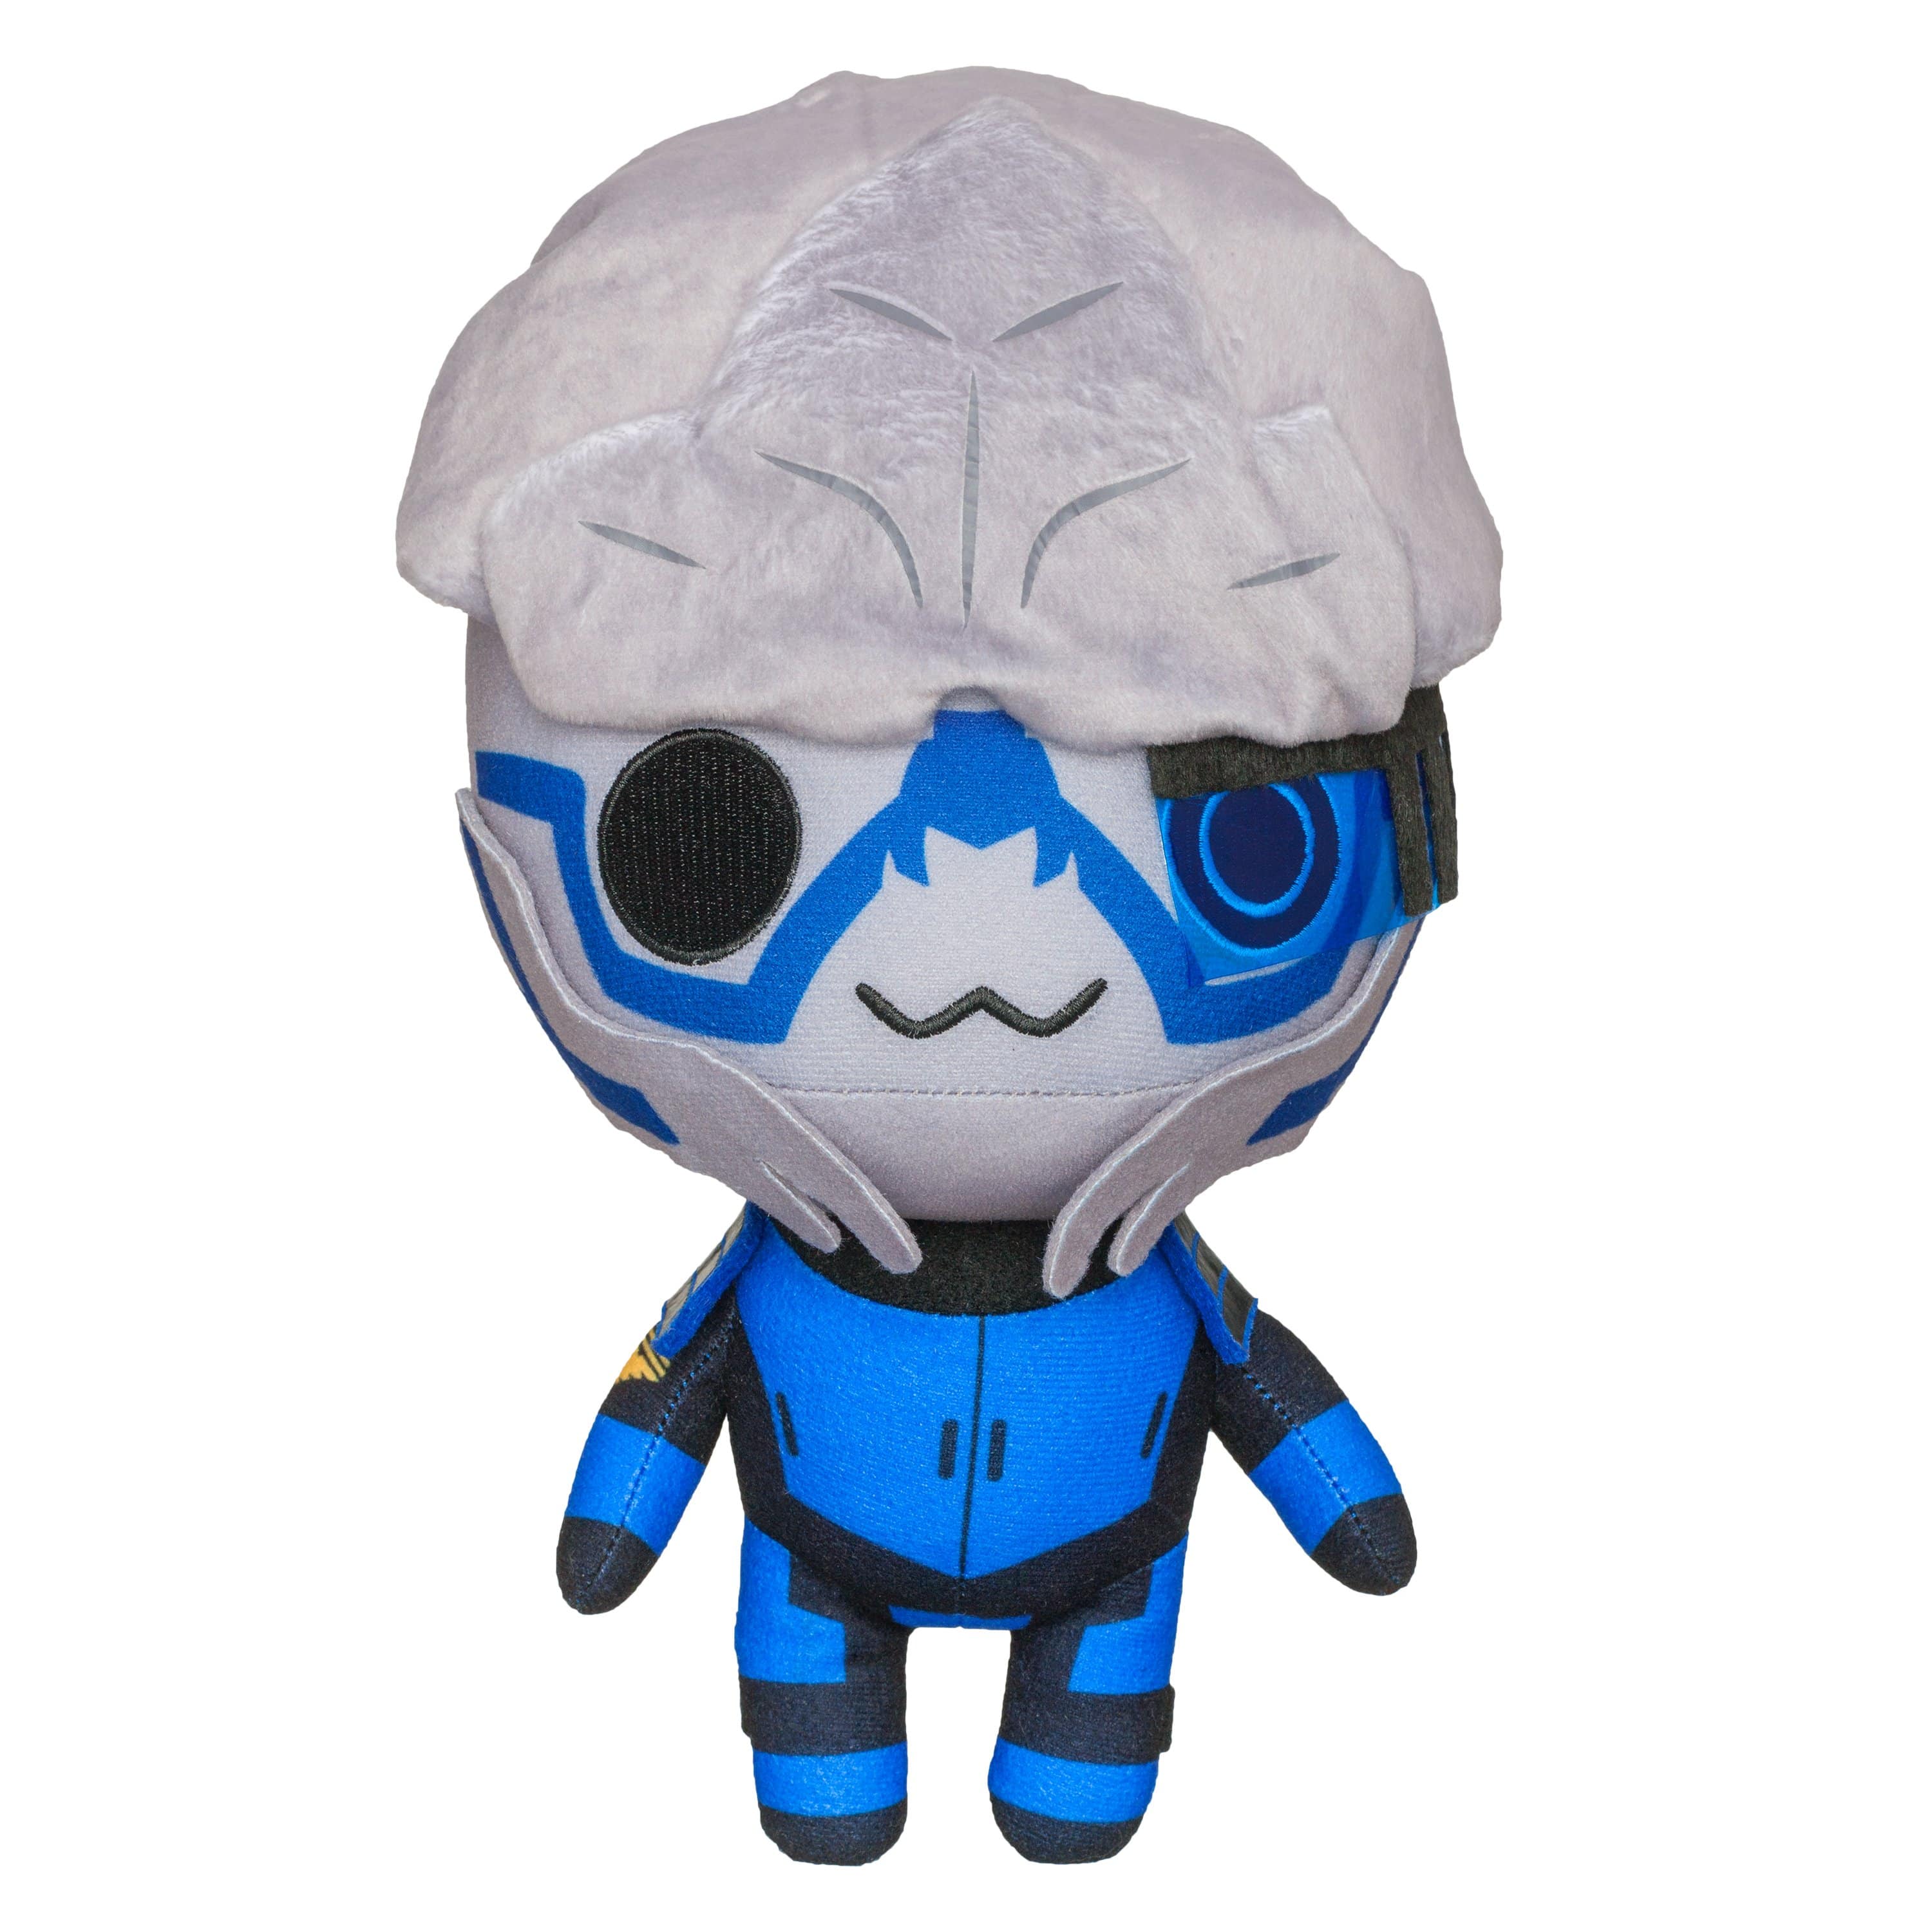 Mass Effect - 11" Garrus Collector's Stuffed Plush Toy Front View